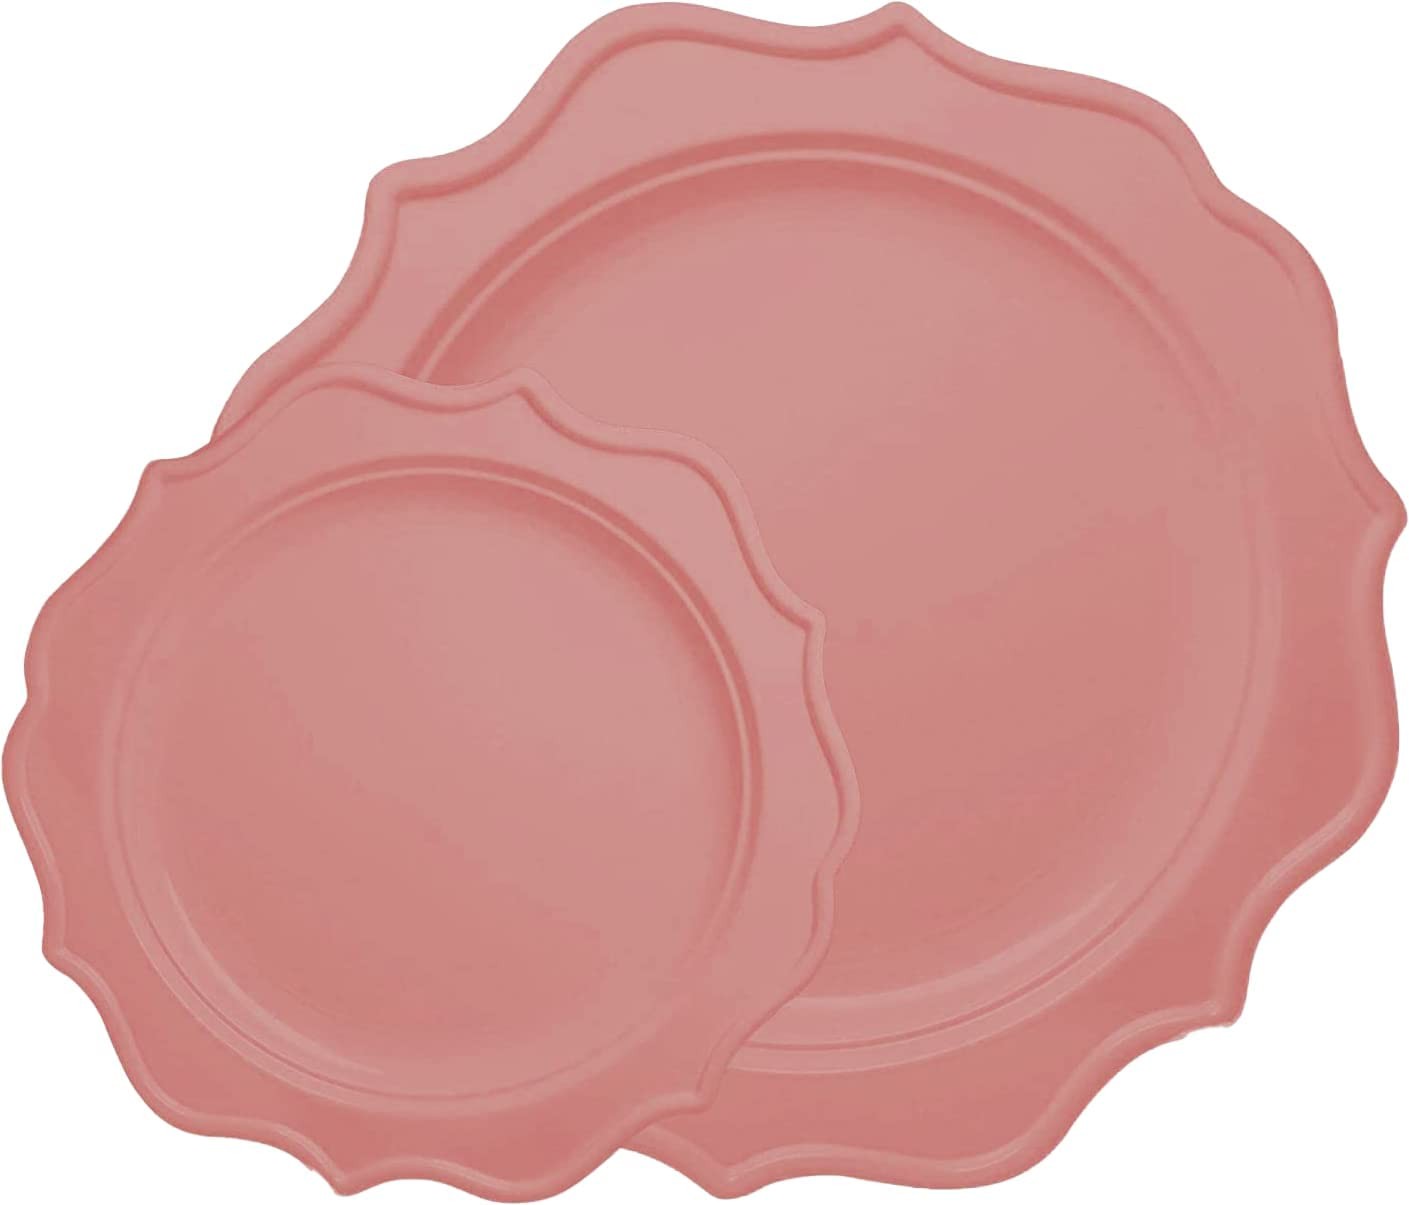 TigerChef Pink Scalloped Rim Disposable Party Set, Includes 10" and 8" Plates, Service for 48